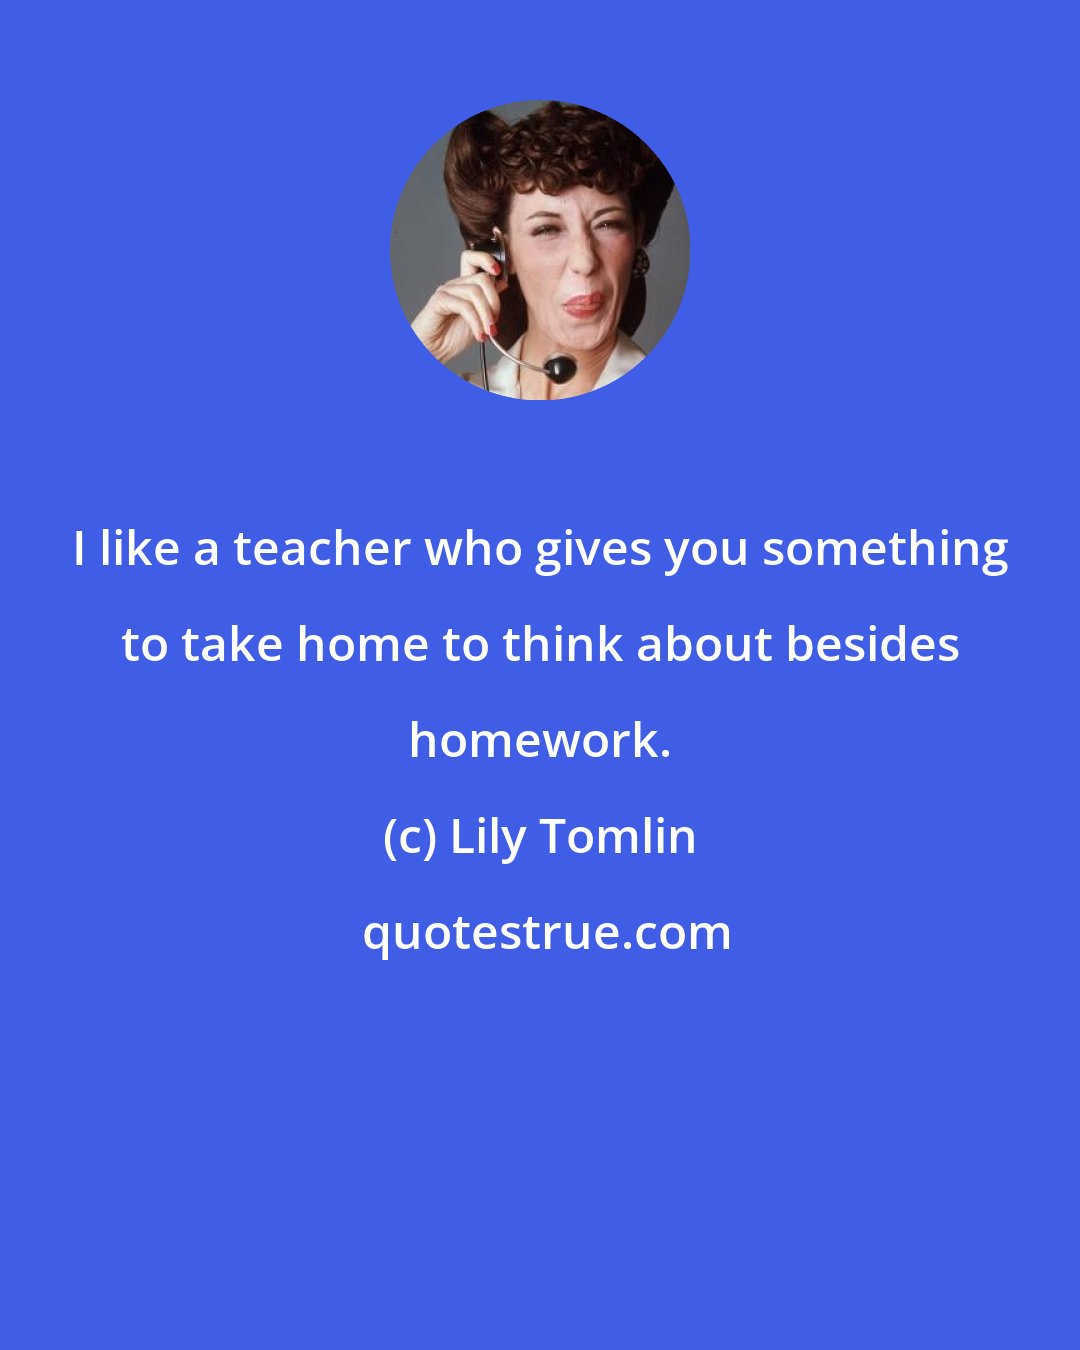 Lily Tomlin: I like a teacher who gives you something to take home to think about besides homework.